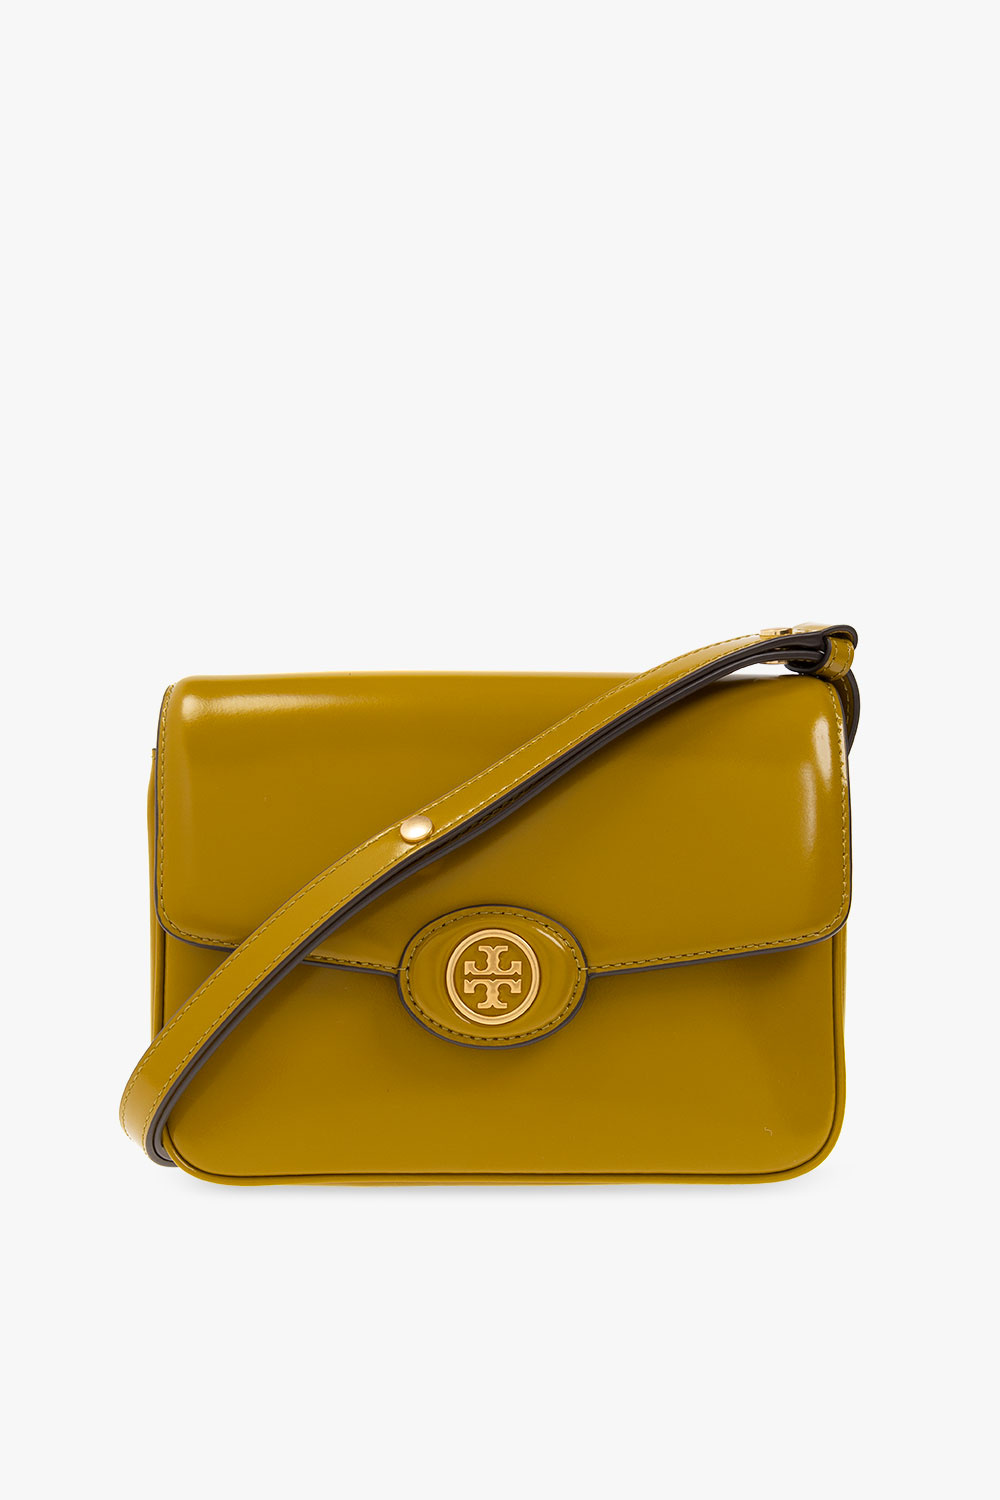 Tory Burch Robinson Tote Leather Women's Bag - Green